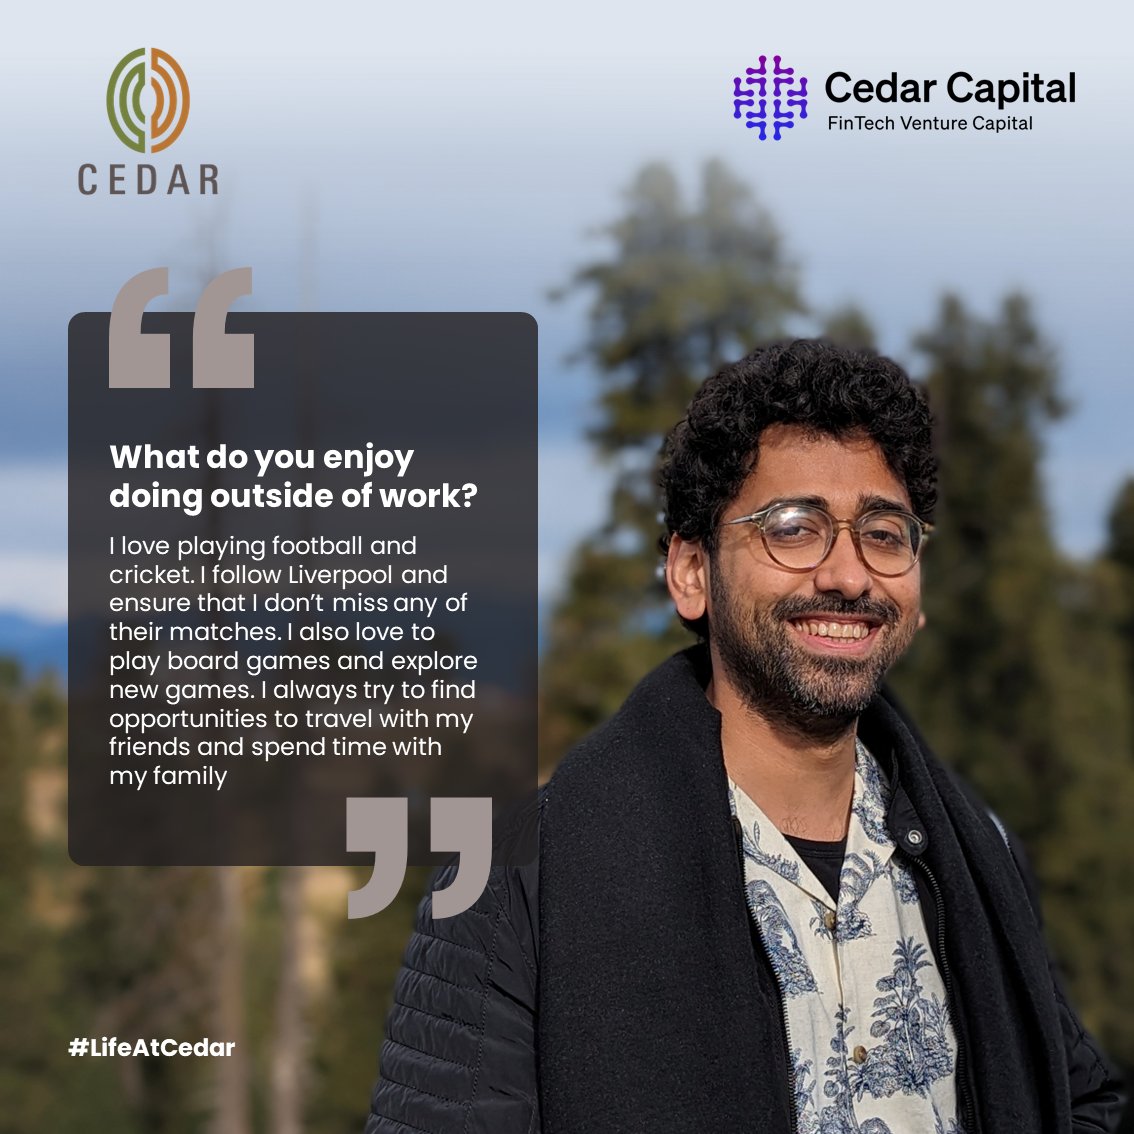 '2+ amazing years at Cedar! Interacting & learning from diverse stakeholders fuels my journey. We innovate & set new benchmarks effortlessly, driven by our global team.' Read more about Alan Nigrel's inspiring journey! 

#LifeatCedar #PeopleSpotlight #WorkCulture #JoinUs